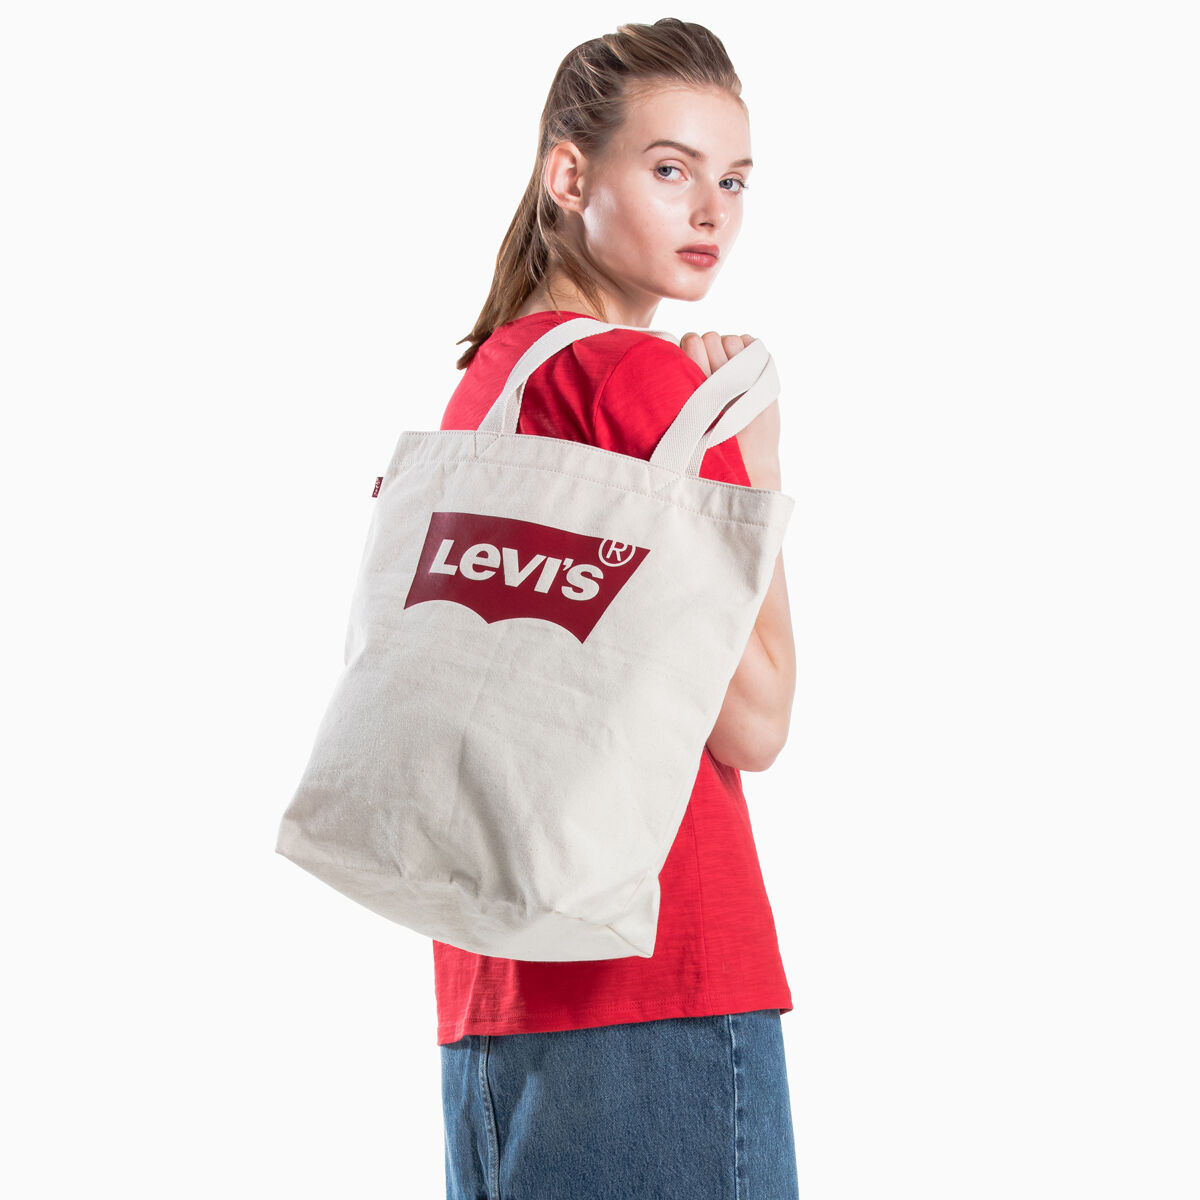 Levi's® Accessoryバットウィングトートバッグ｜リーバイス® 公式通販